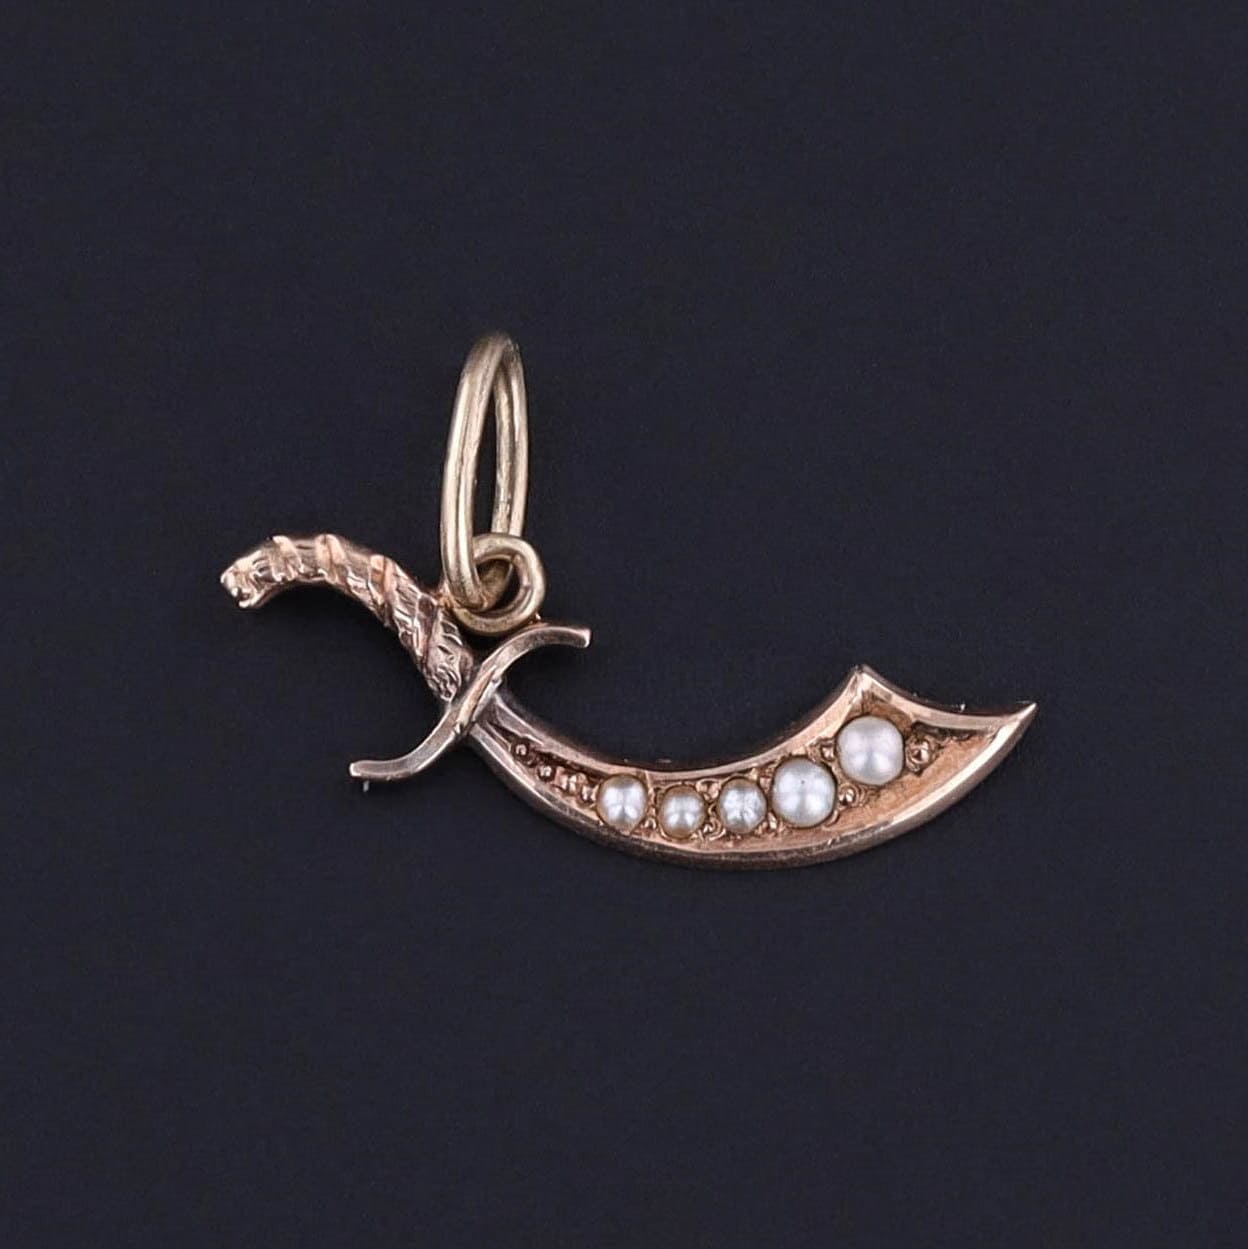 Antique Pearl Dadao Sword Charm of 10k Gold